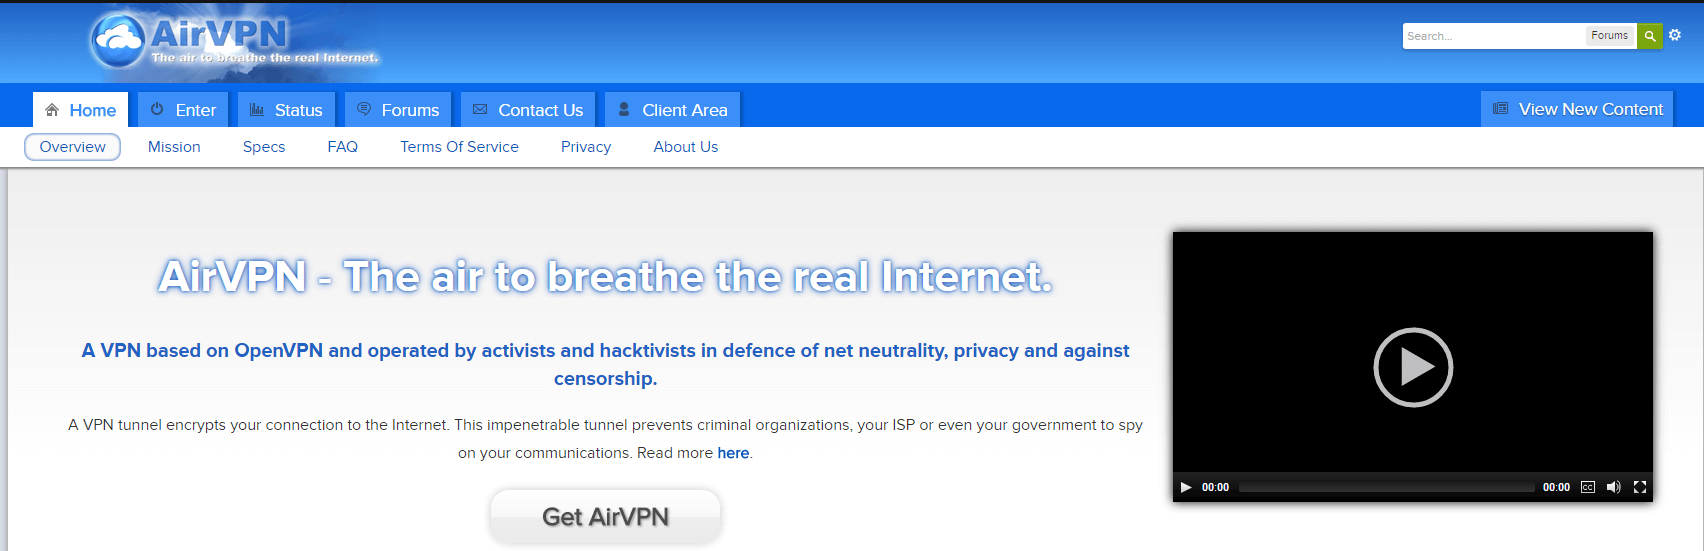 AirVPN Review: Sky-High Security & Breeze To Use